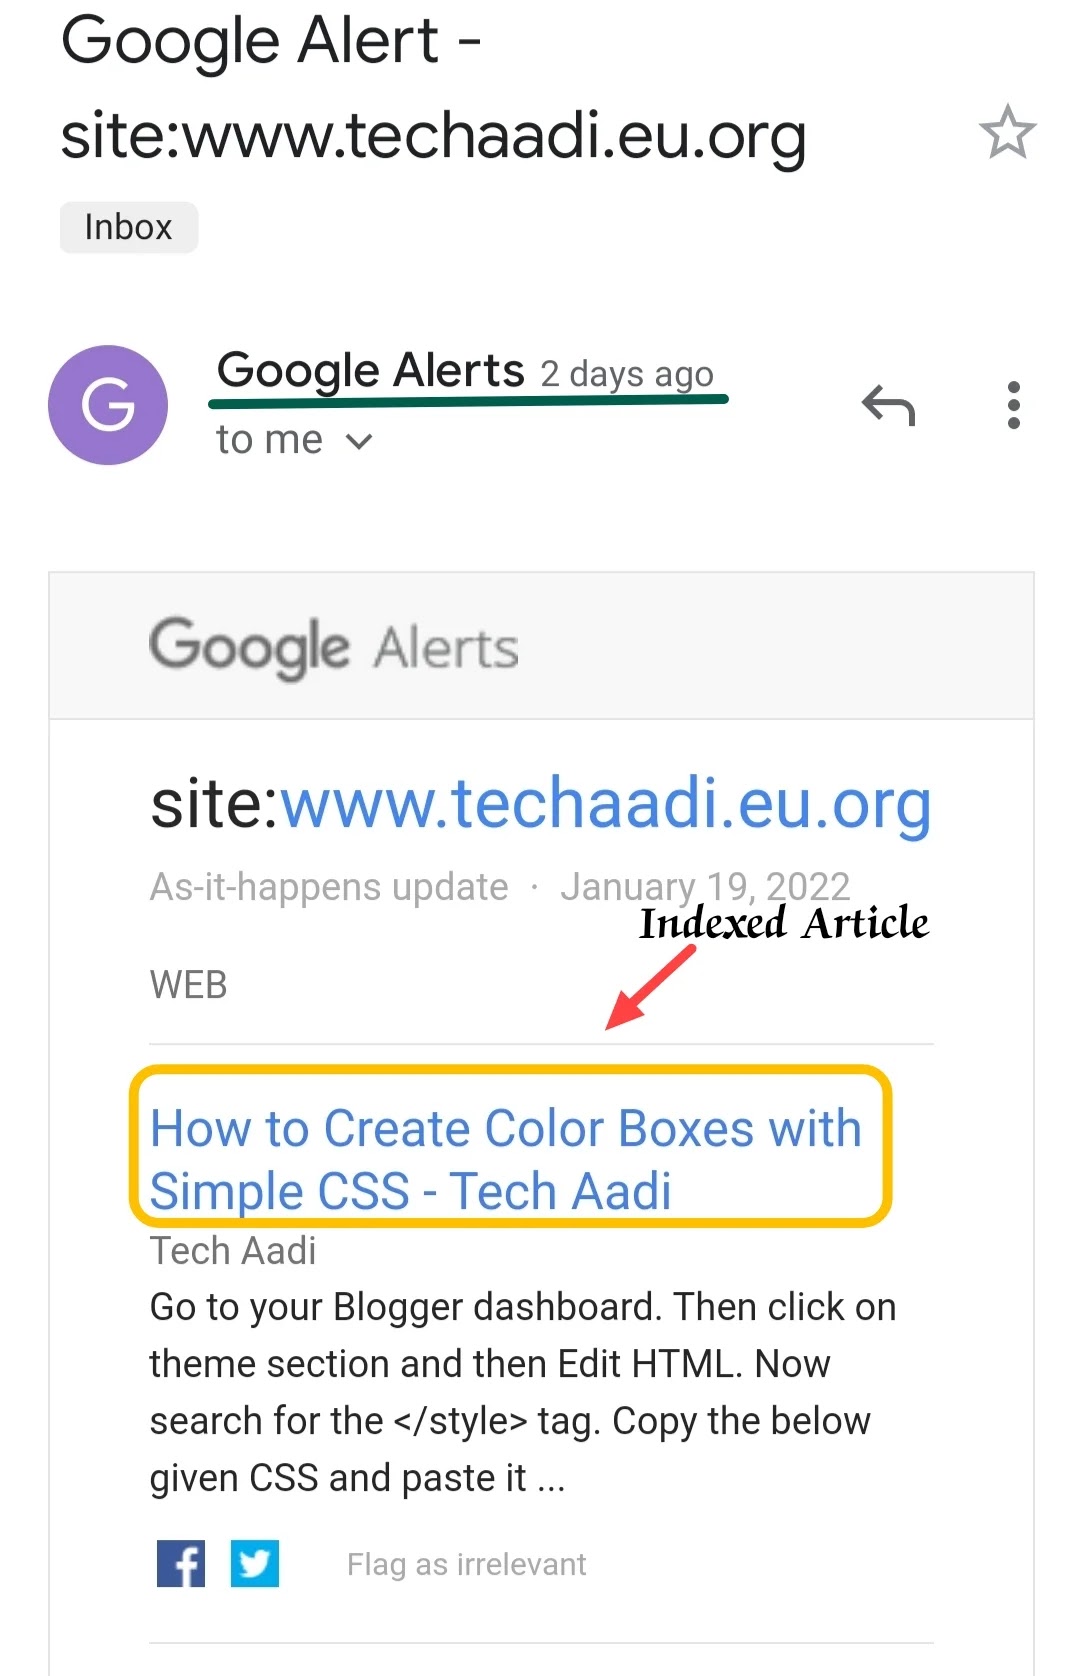 Google Alert Notification for Your Site